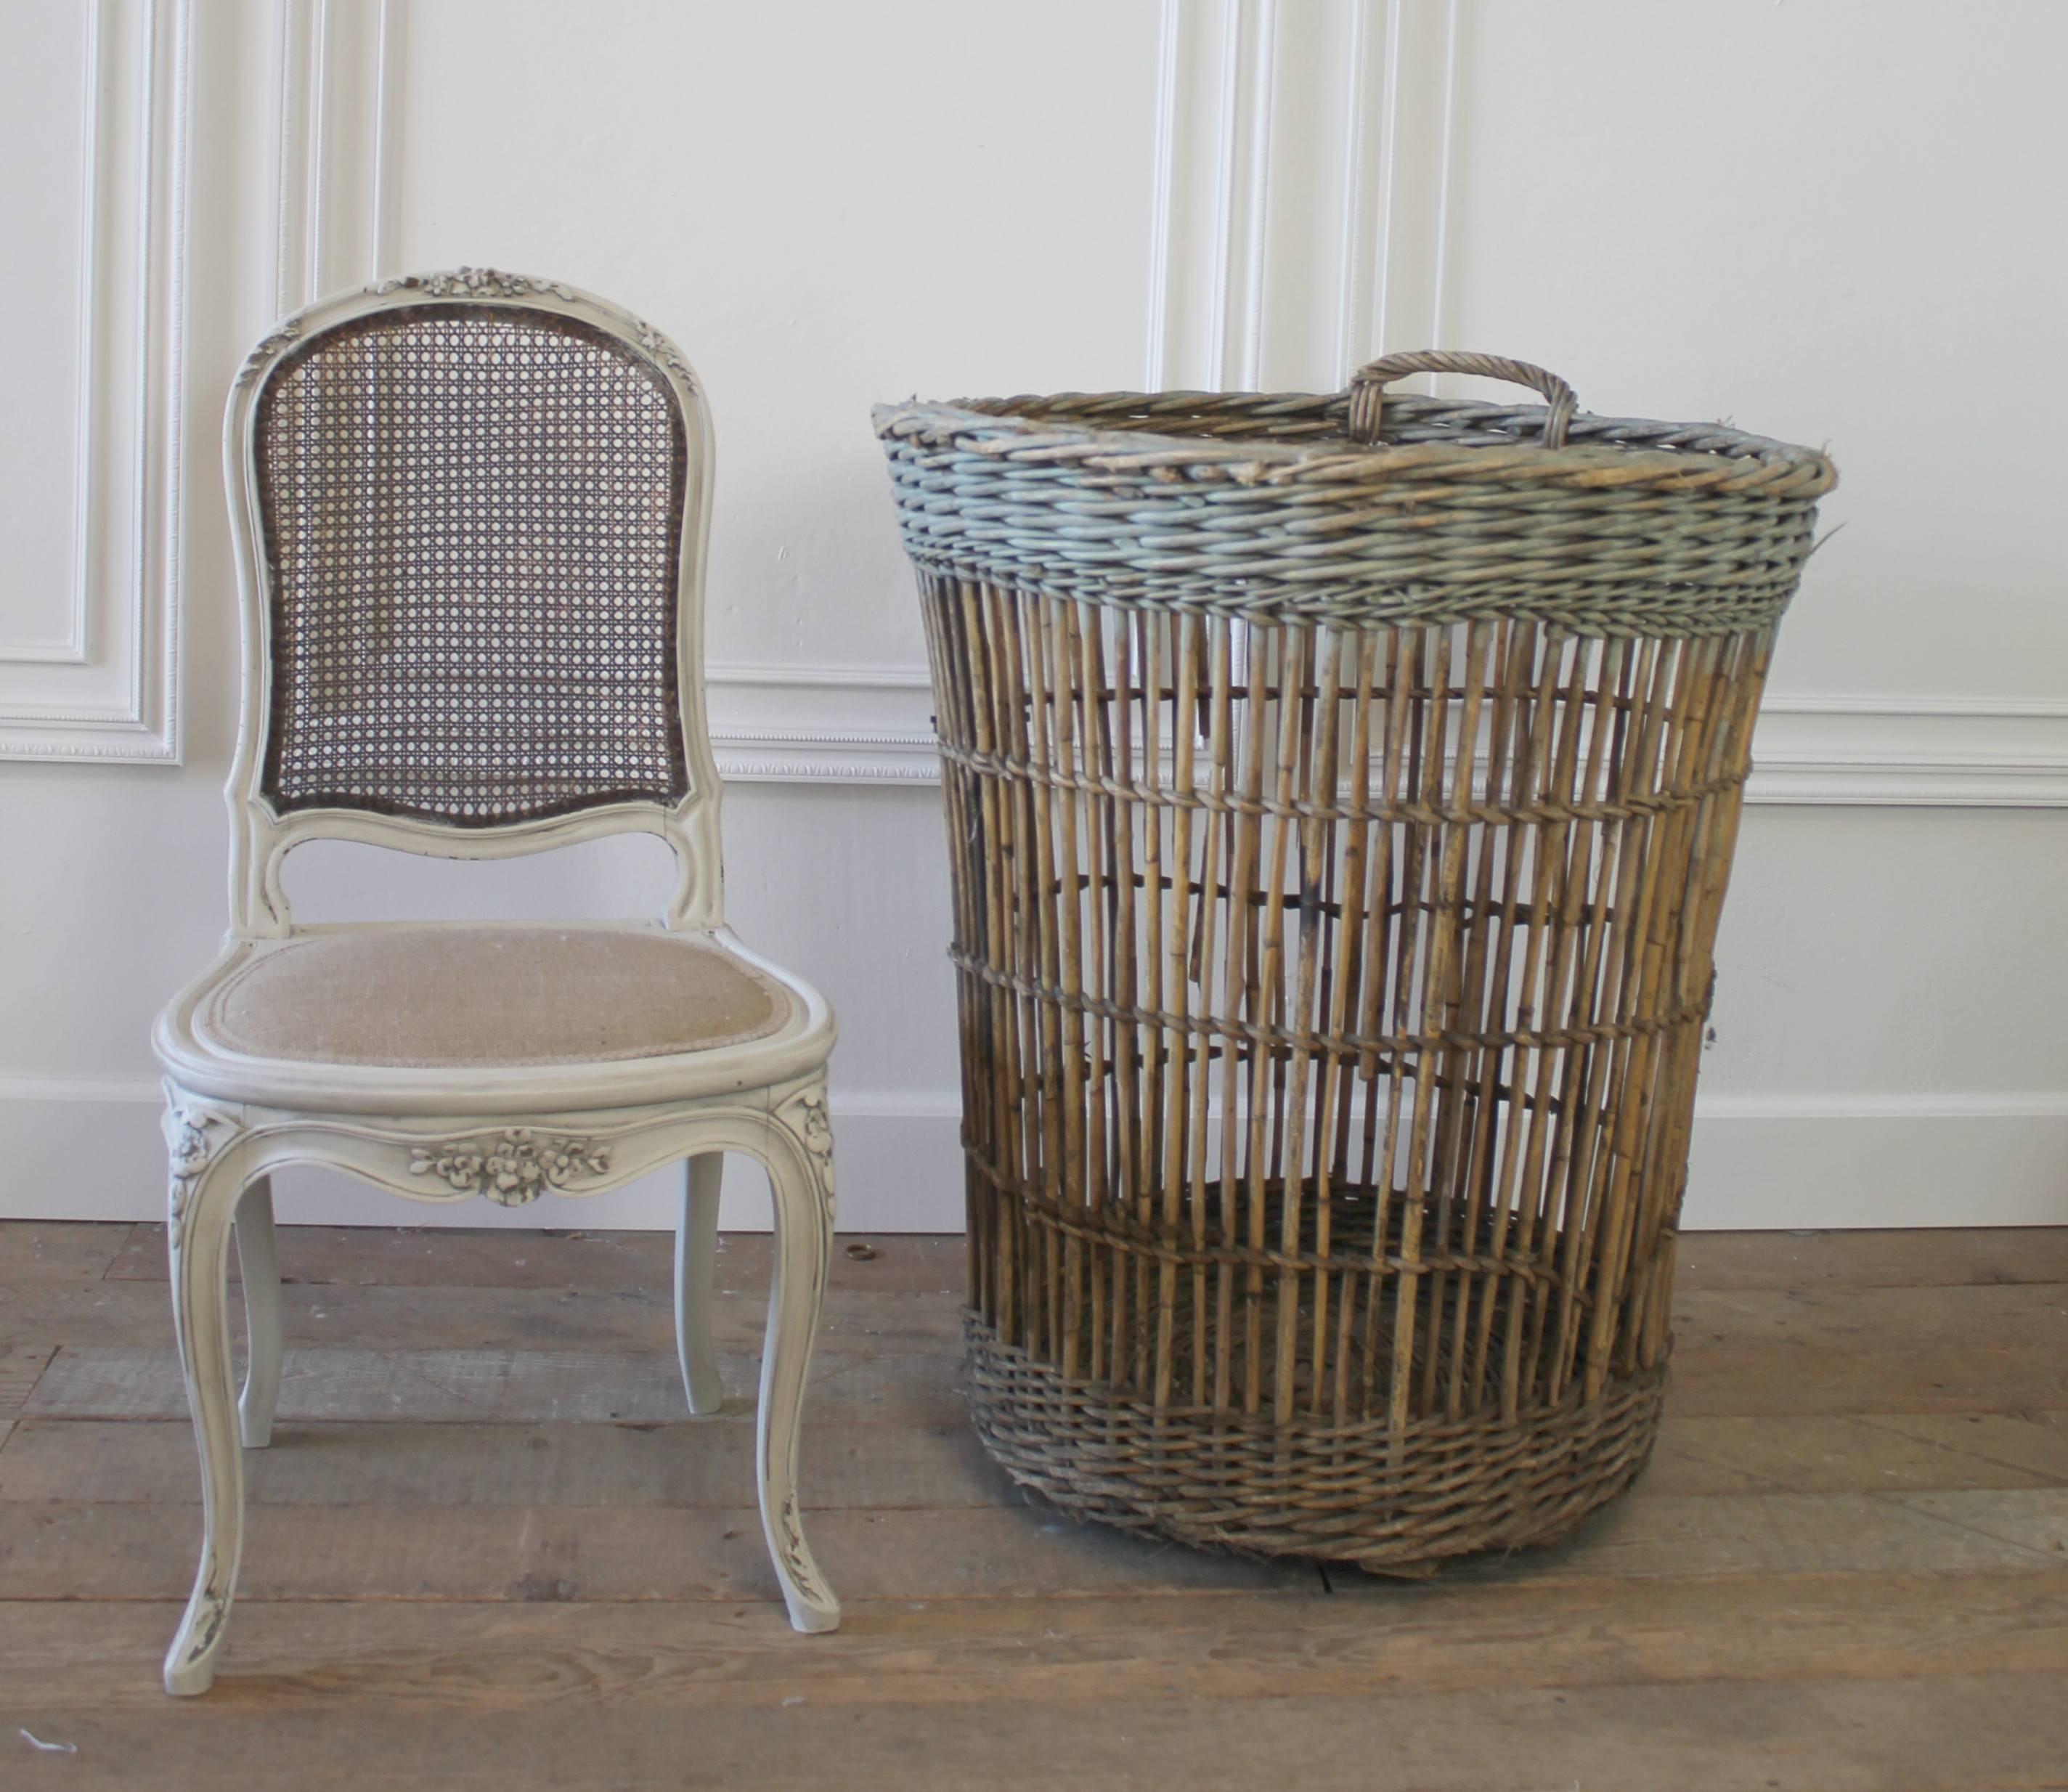 Large French harvest baskets made of woven willow and wood from the Champagne region of Burgundy, France. Beautifully woven with a painted rim, in a faded soft aqua color. The finish is warm and rich. One sits on a wooden base, with double handles.